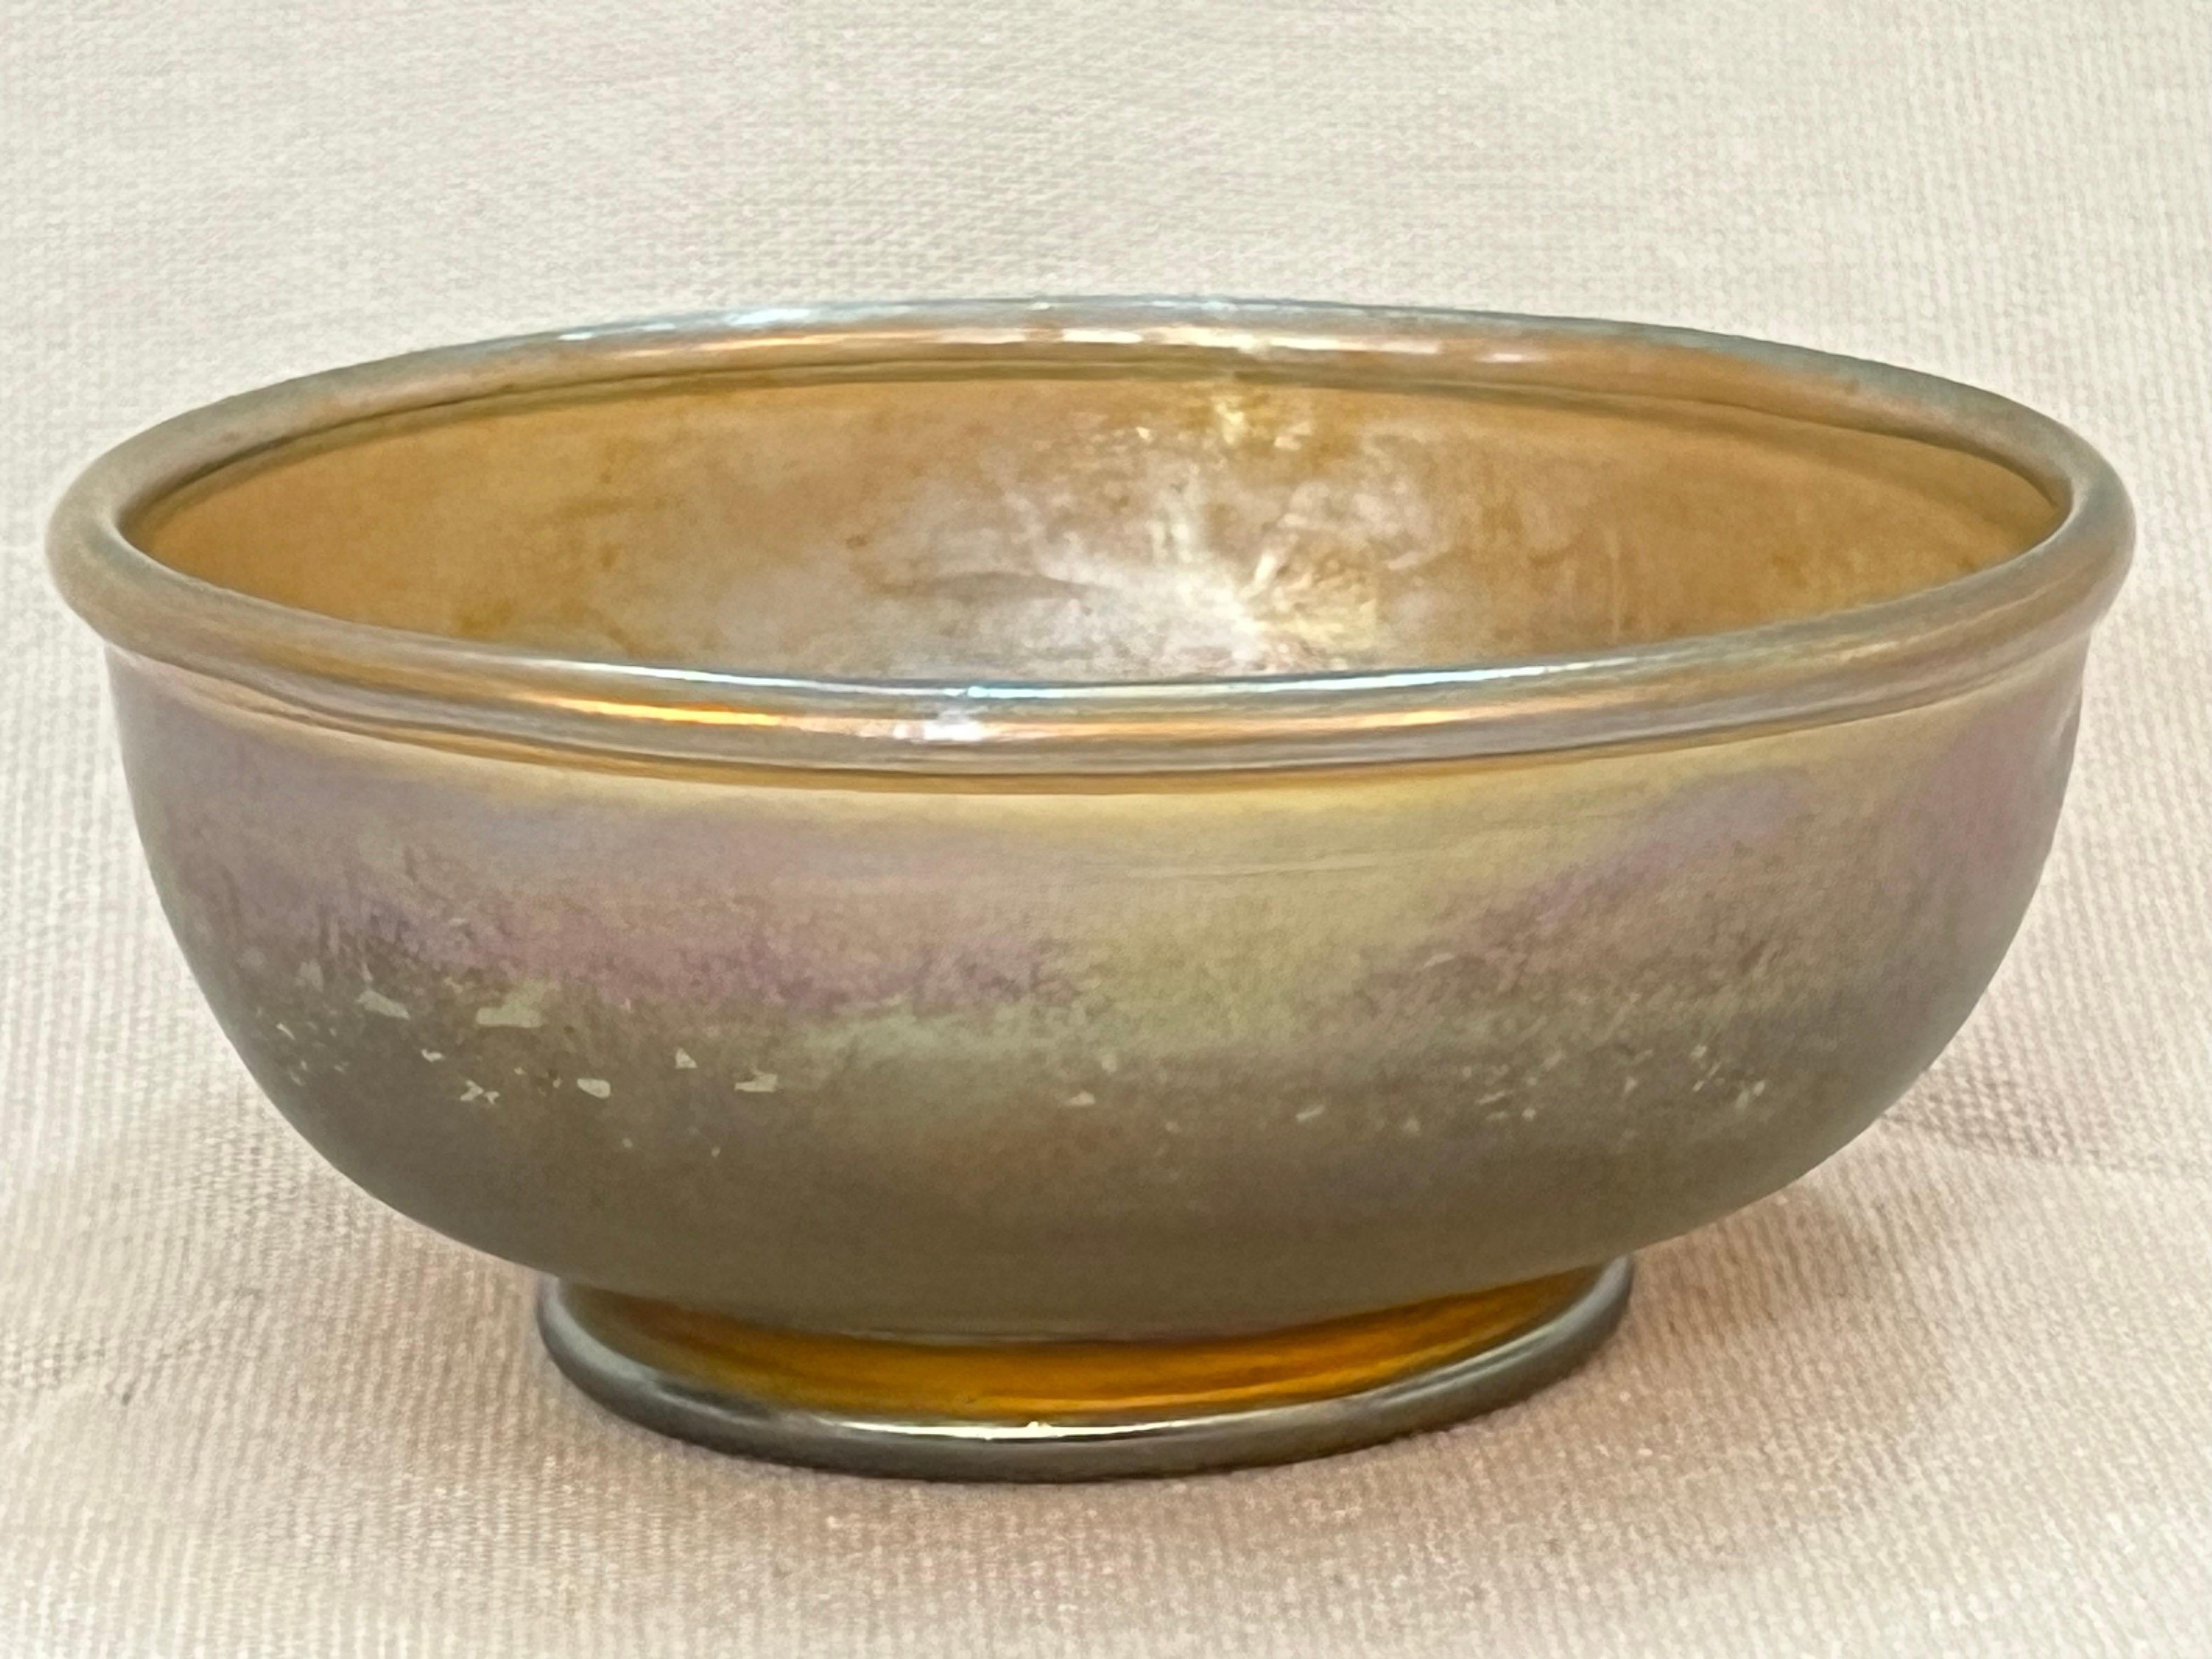 20th Century Louis Comfort Tiffany LCT Favrile Glass Antique Bowl Signed Marked Circa 1910 For Sale